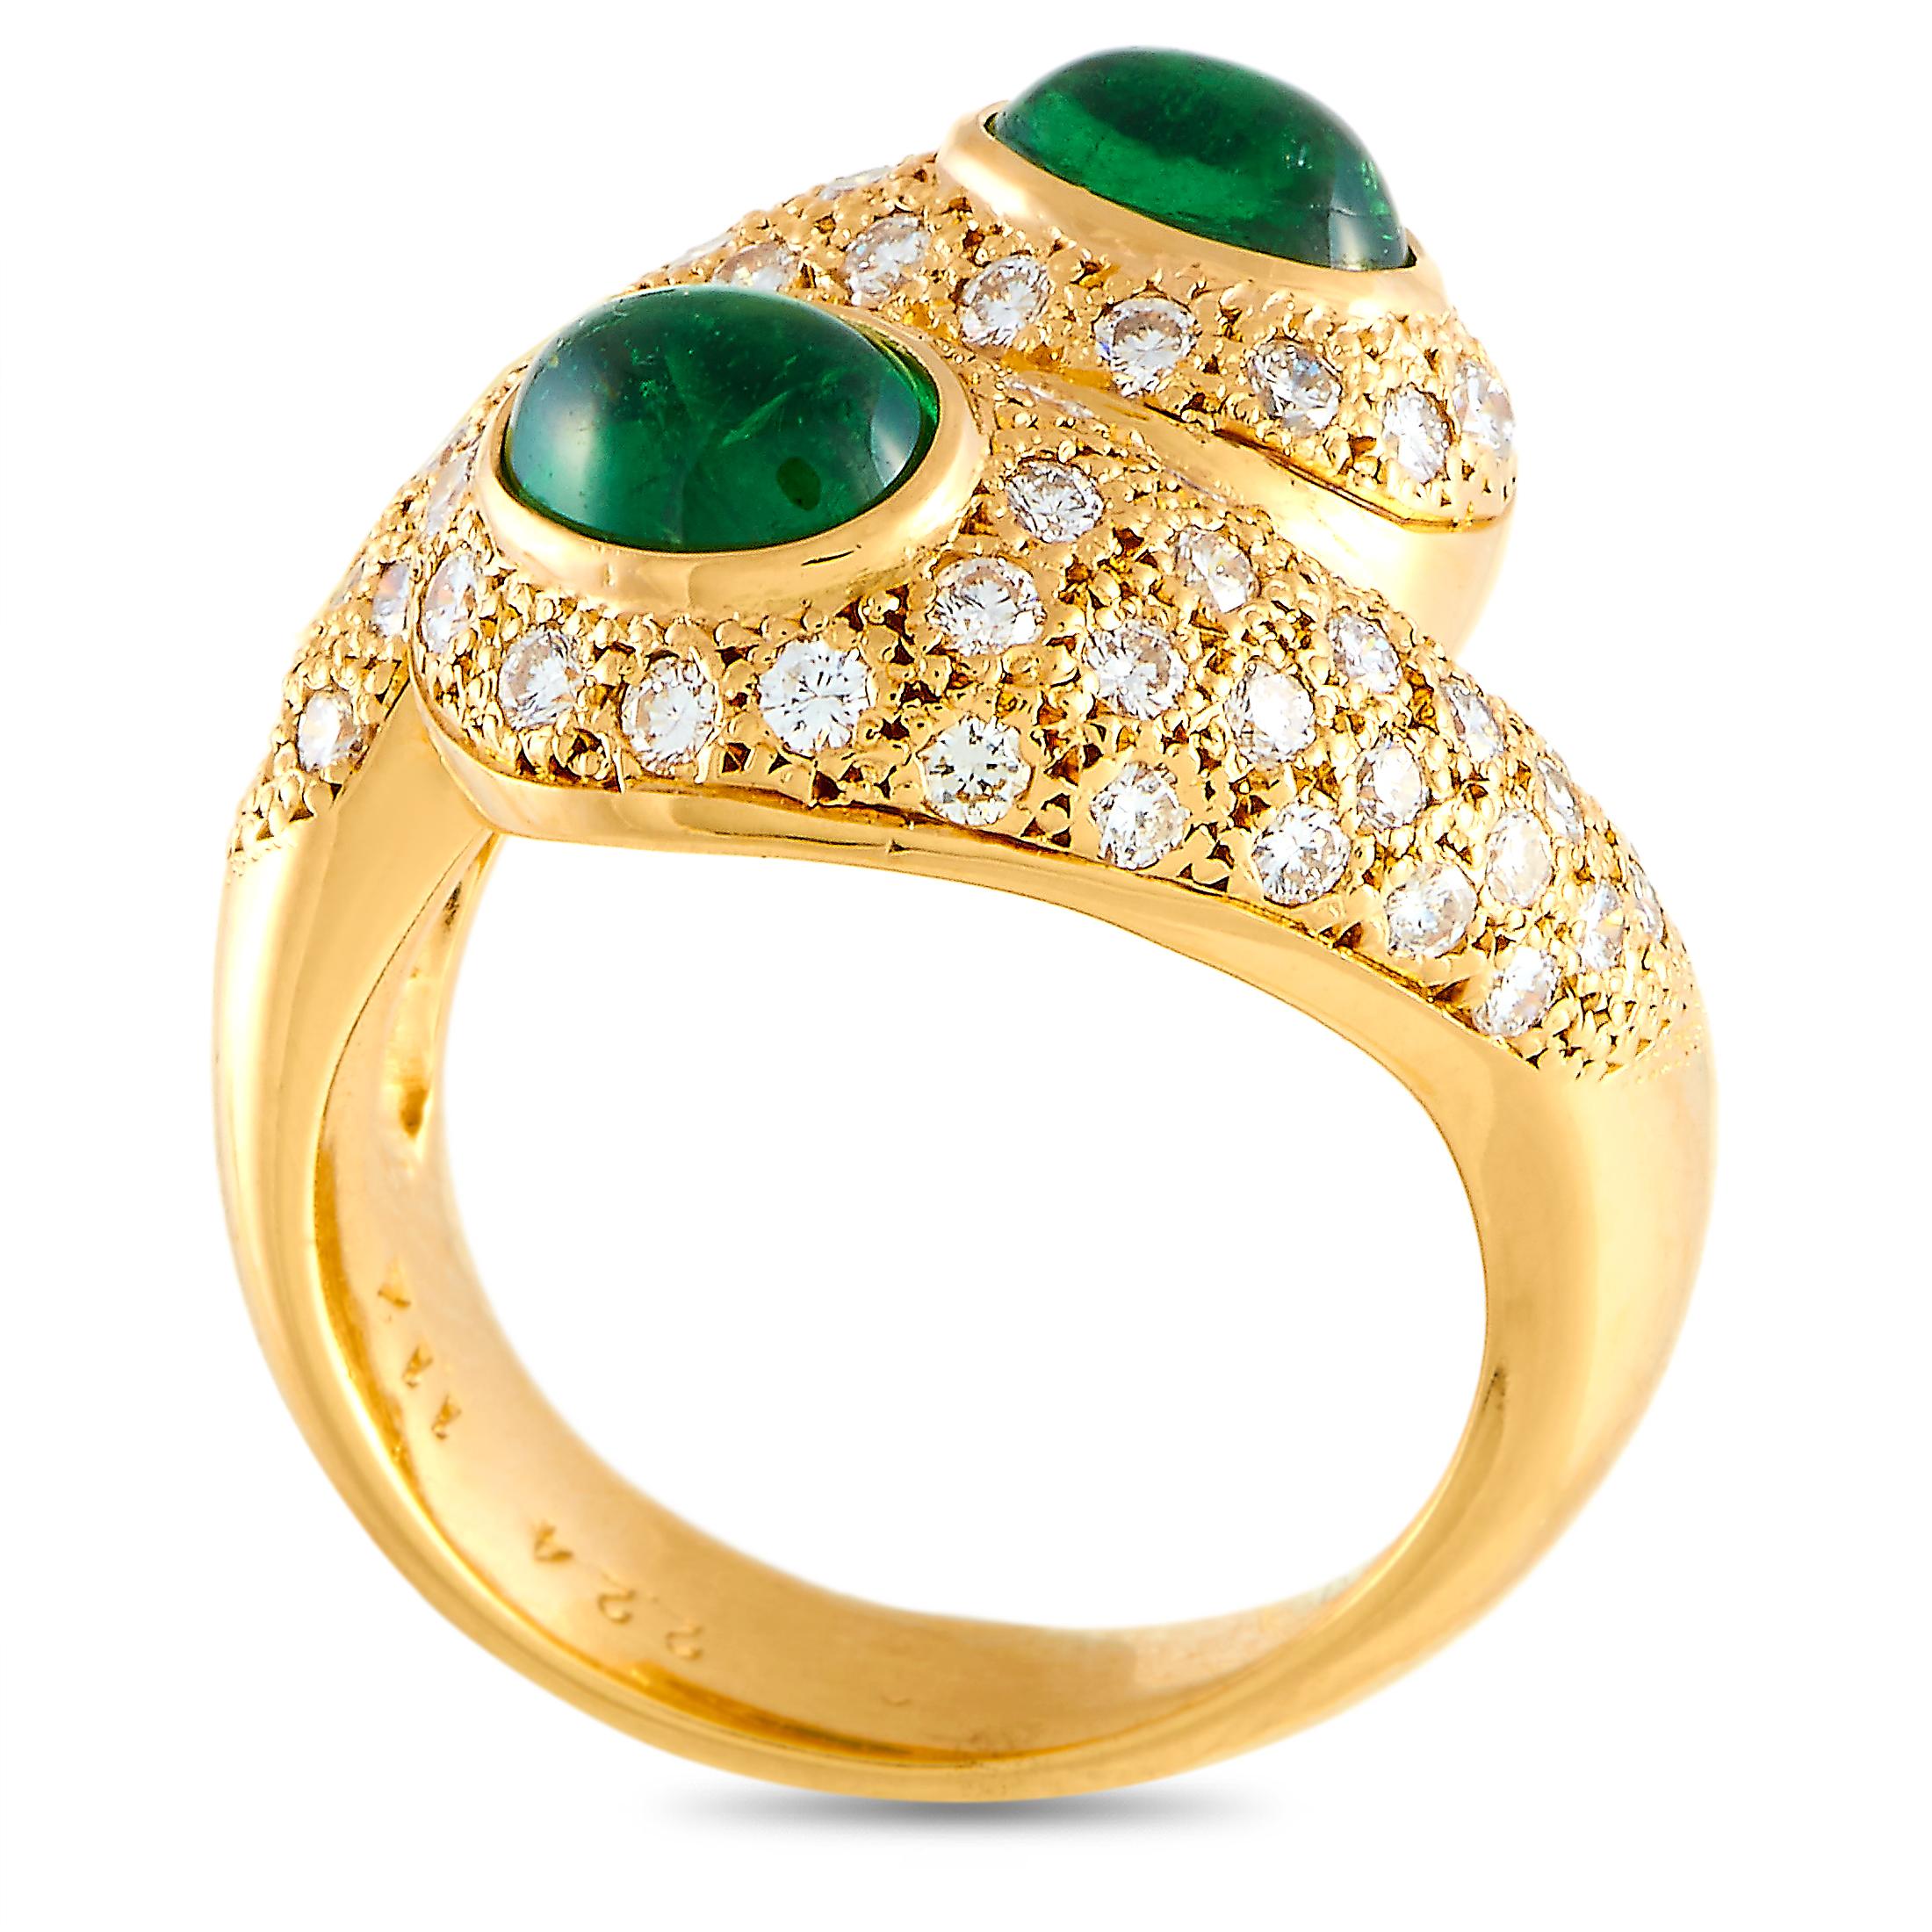 This LB Exclusive ring is crafted from 18K yellow gold and weighs 13.7 grams, boasting band thickness of 6 mm and top height of 7 mm, while top dimensions measure 22 by 17 mm. The ring is set with diamonds and tsavorites that total 1.12 and 2.24